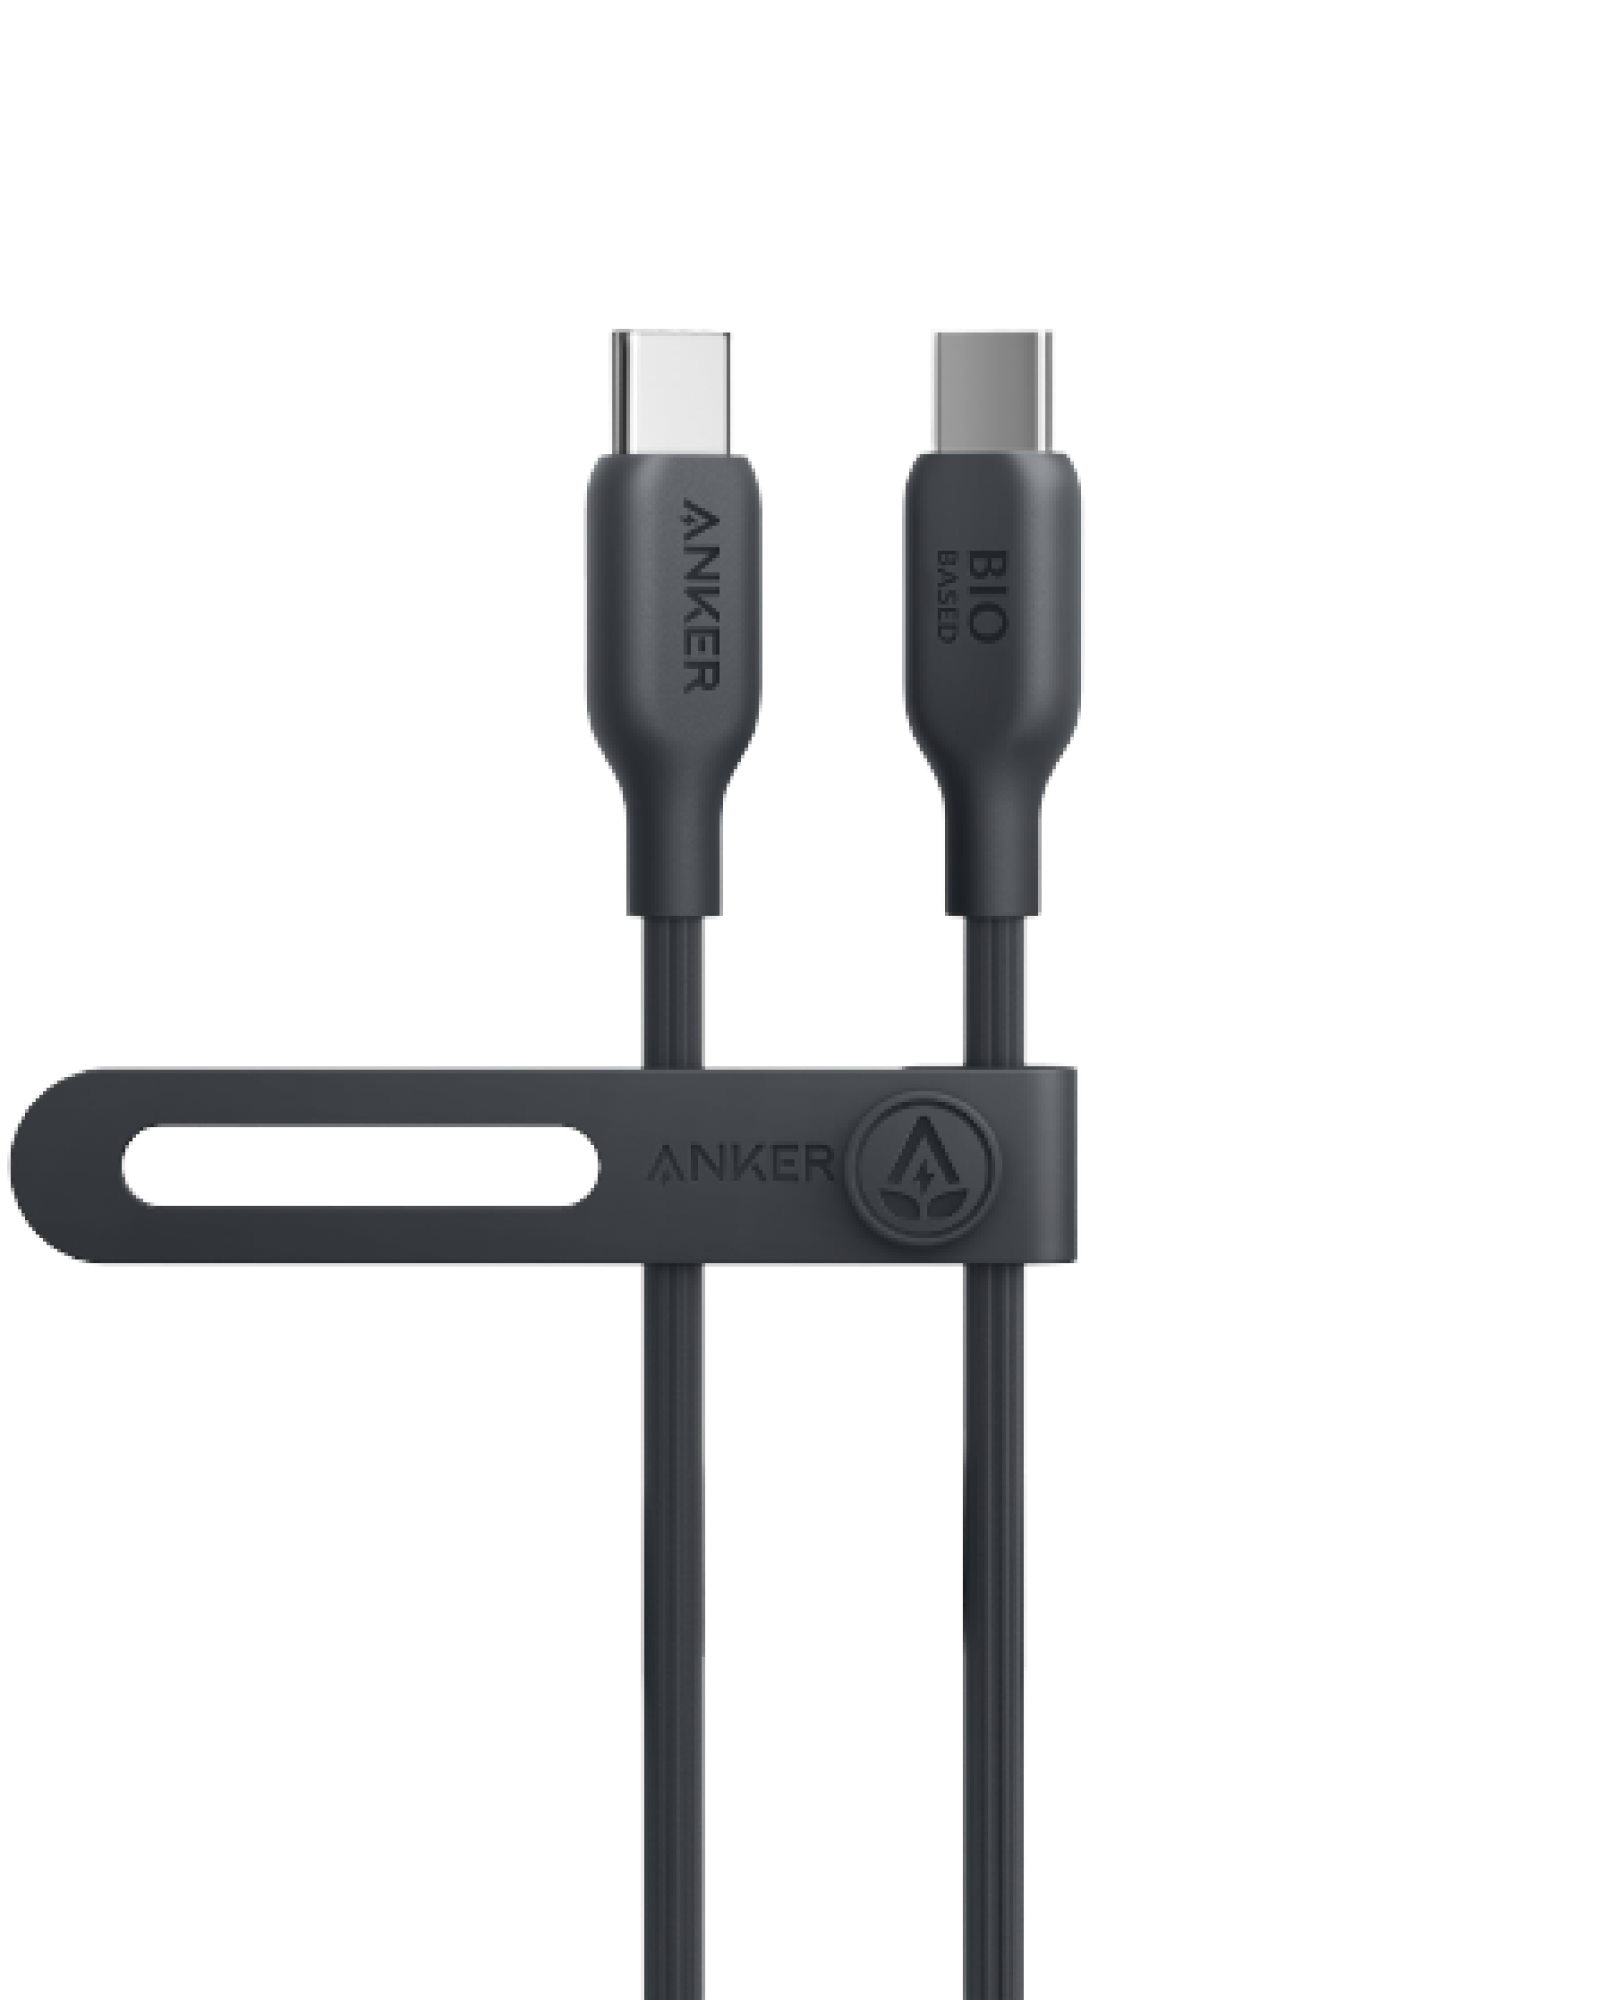 Anker's portable 30W battery pack has a built-in USB-C cable and